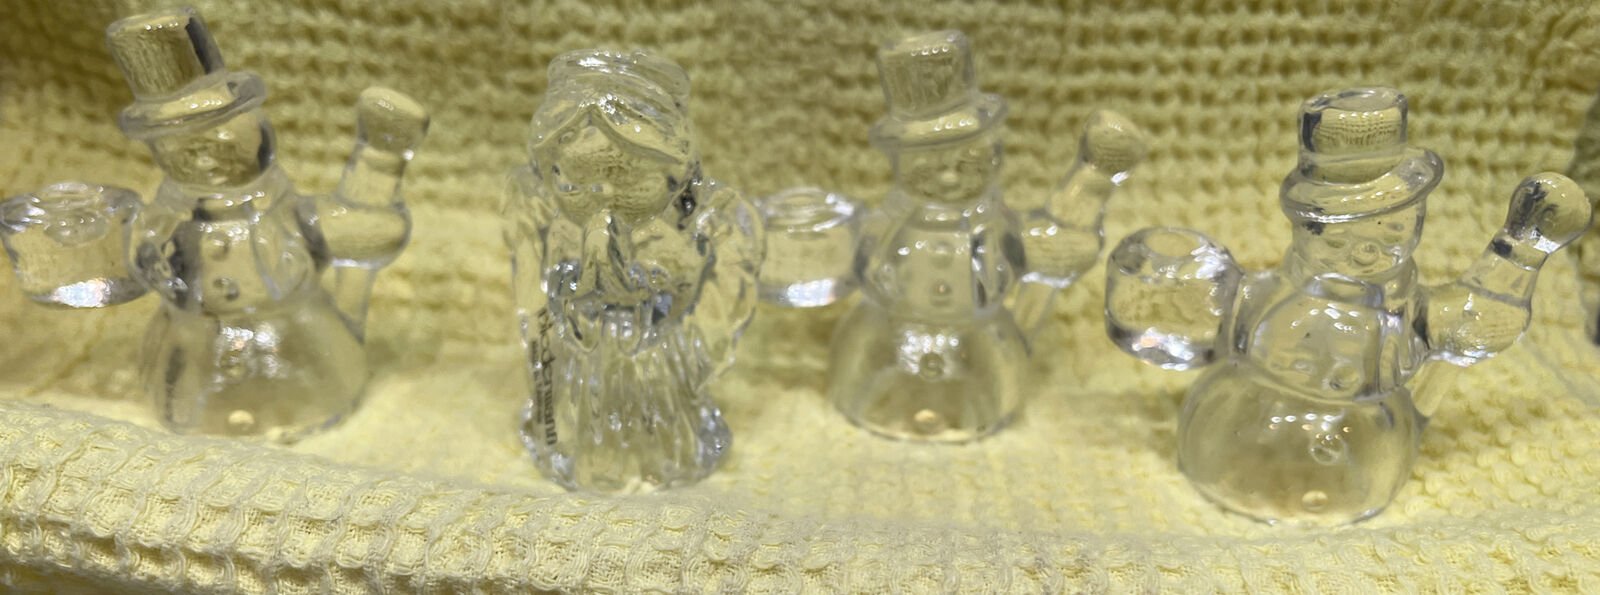 Biedermann Crystal Clear Glass Lot Of 4 Miniature Candle Holders Christmas VTG